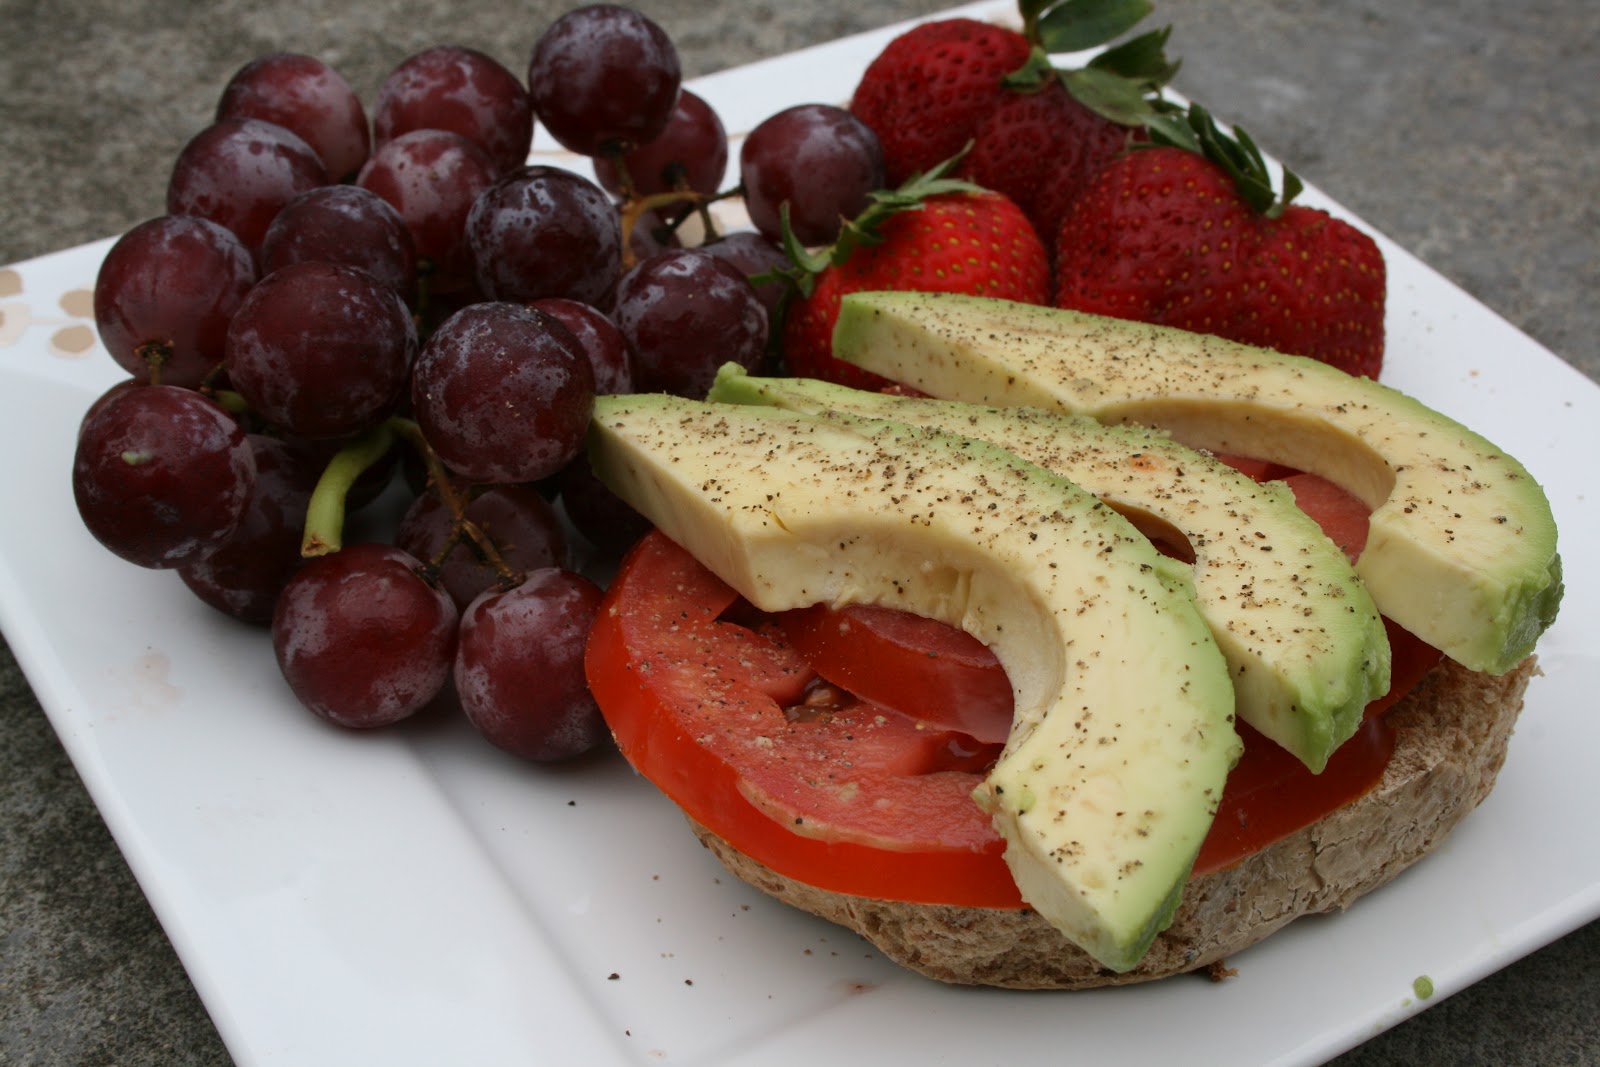 Uppiesbeads59 blog: A healthy lunch...what I had today